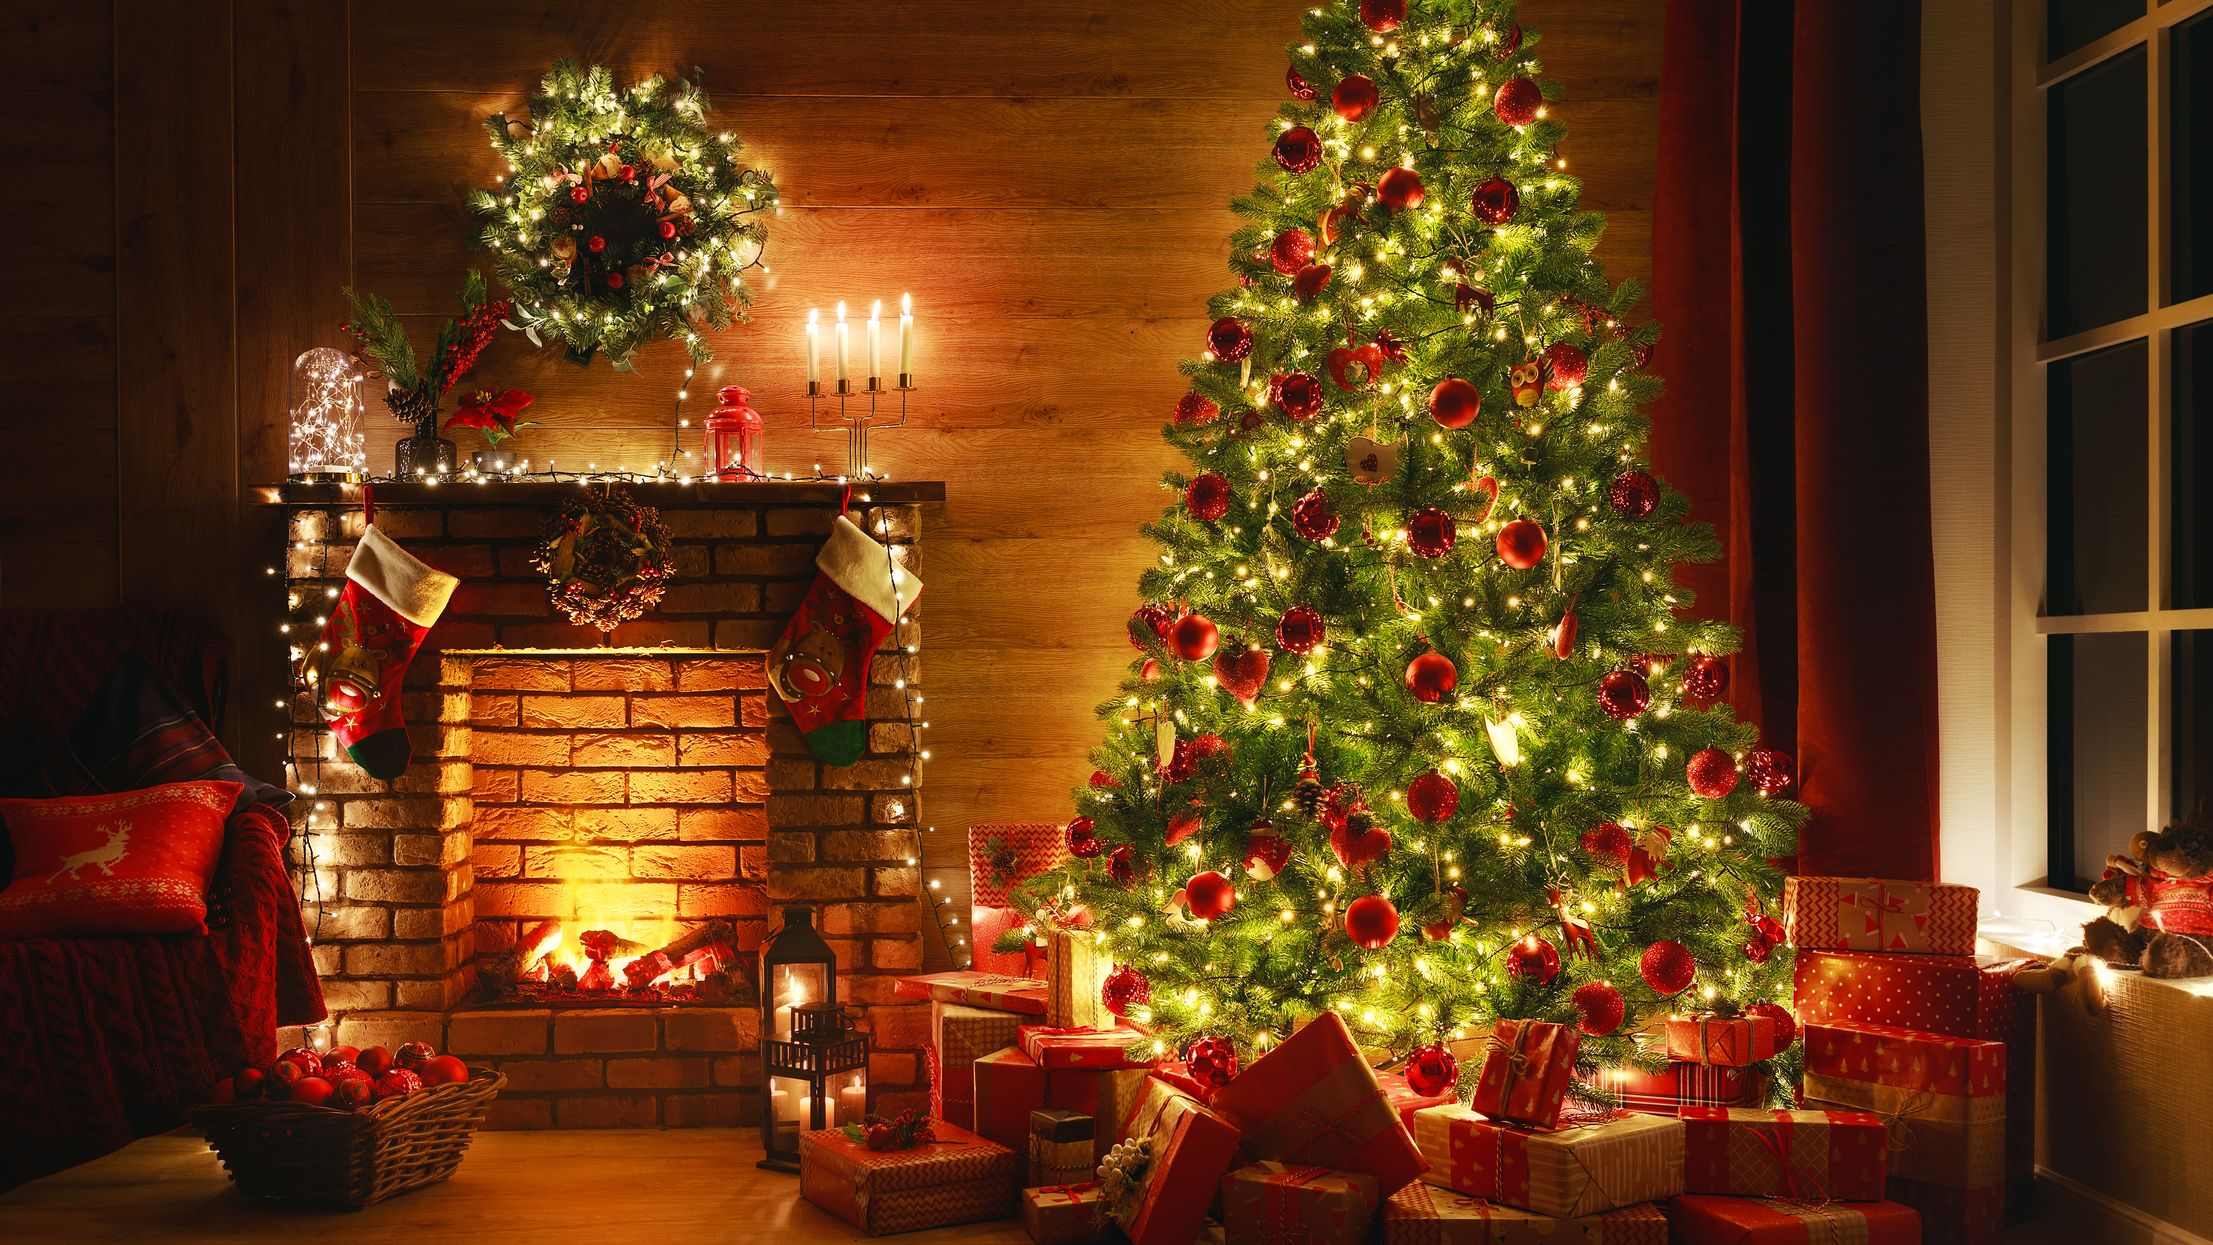 https://hips.hearstapps.com/hmg-prod/images/interior-christmas-magic-glowing-tree-fireplace-royalty-free-image-1628537941.jpg?crop=1xw:0.91898xh;center,top